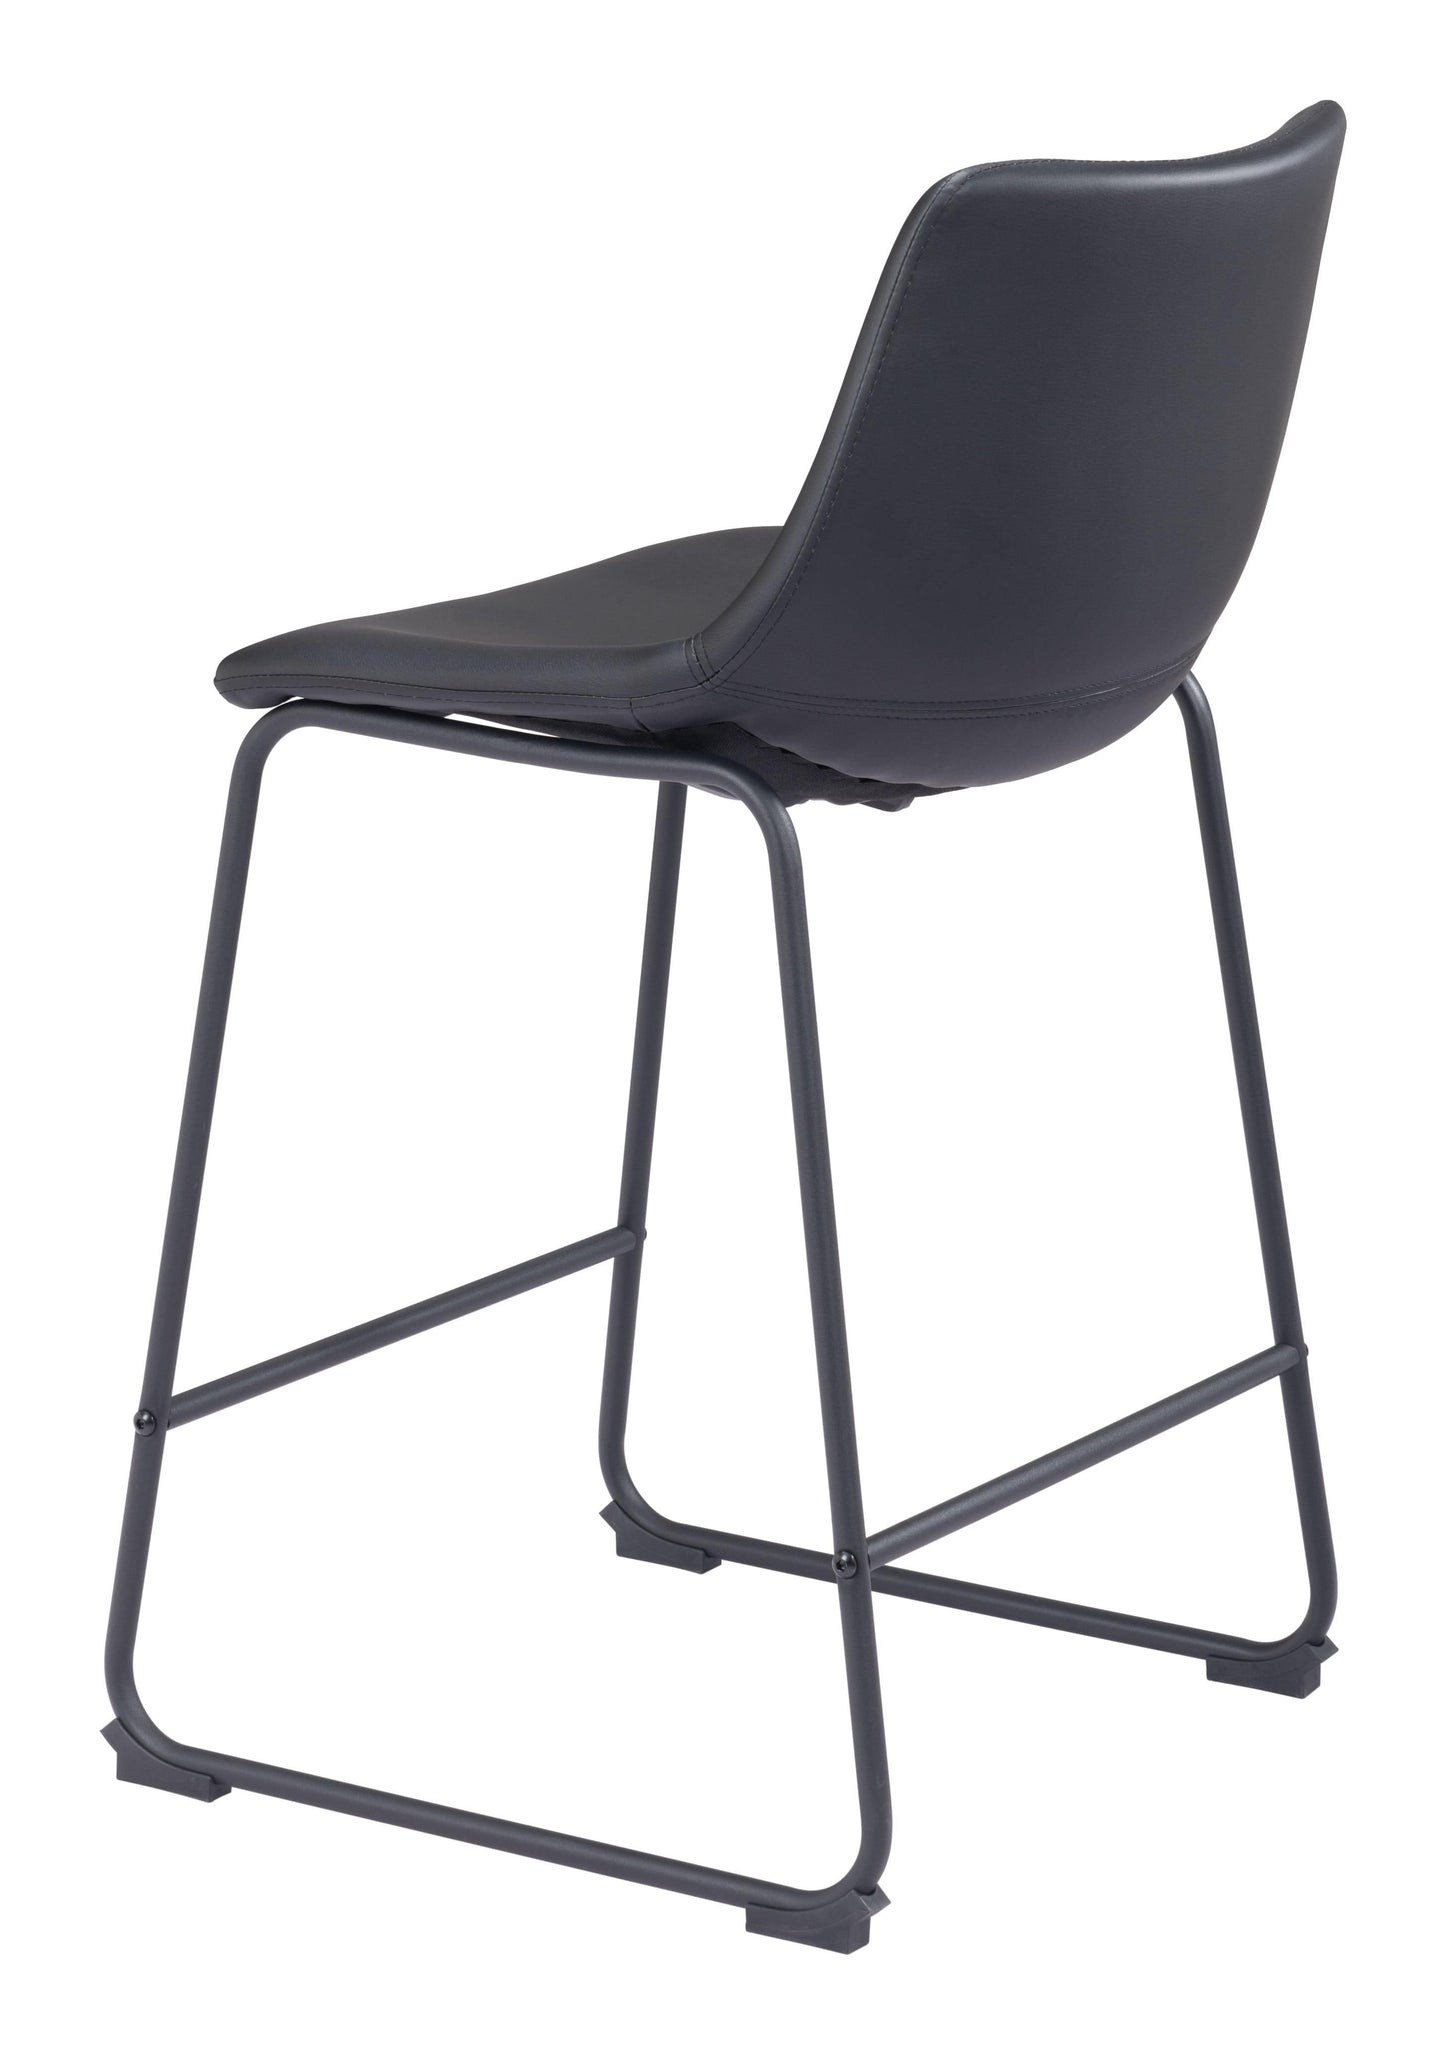 Angled back view of counter chair